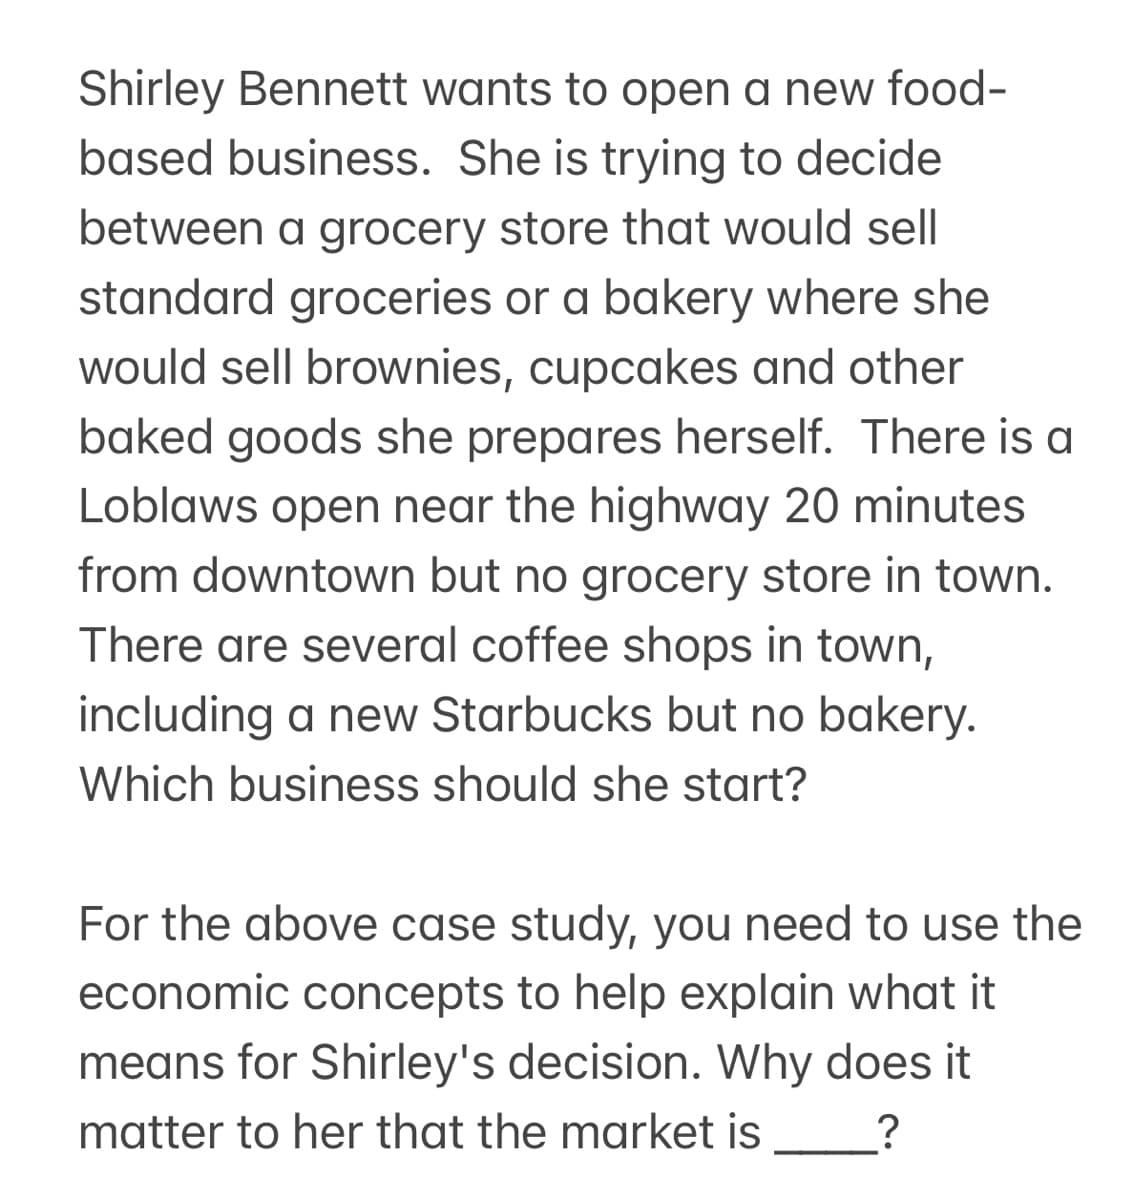 Shirley Bennett wants to open a new food-
based business. She is trying to decide
between a grocery store that would sell
standard groceries or a bakery where she
would sell brownies, cupcakes and other
baked goods she prepares herself. There is a
Loblaws open near the highway 20 minutes
from downtown but no grocery store in town.
There are several coffee shops in town,
including a new Starbucks but no bakery.
Which business should she start?
For the above case study, you need to use the
economic concepts to help explain what it
means for Shirley's decision. Why does it
matter to her that the market is ?